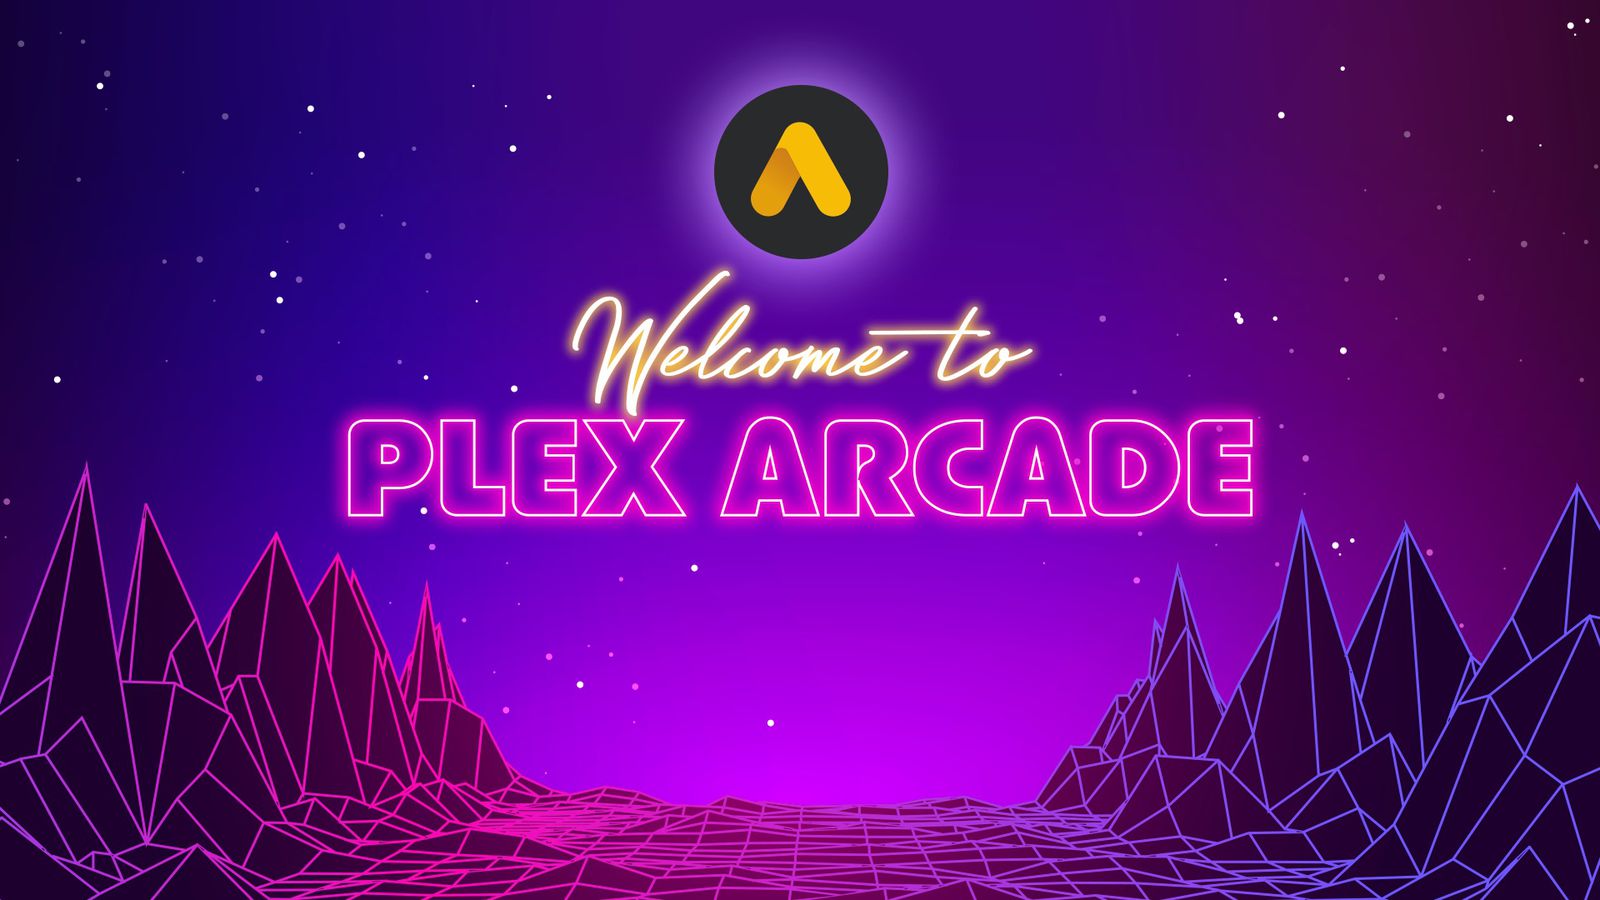 You can now stream retro games to your browser, TV and Android devices with  Plex Arcade